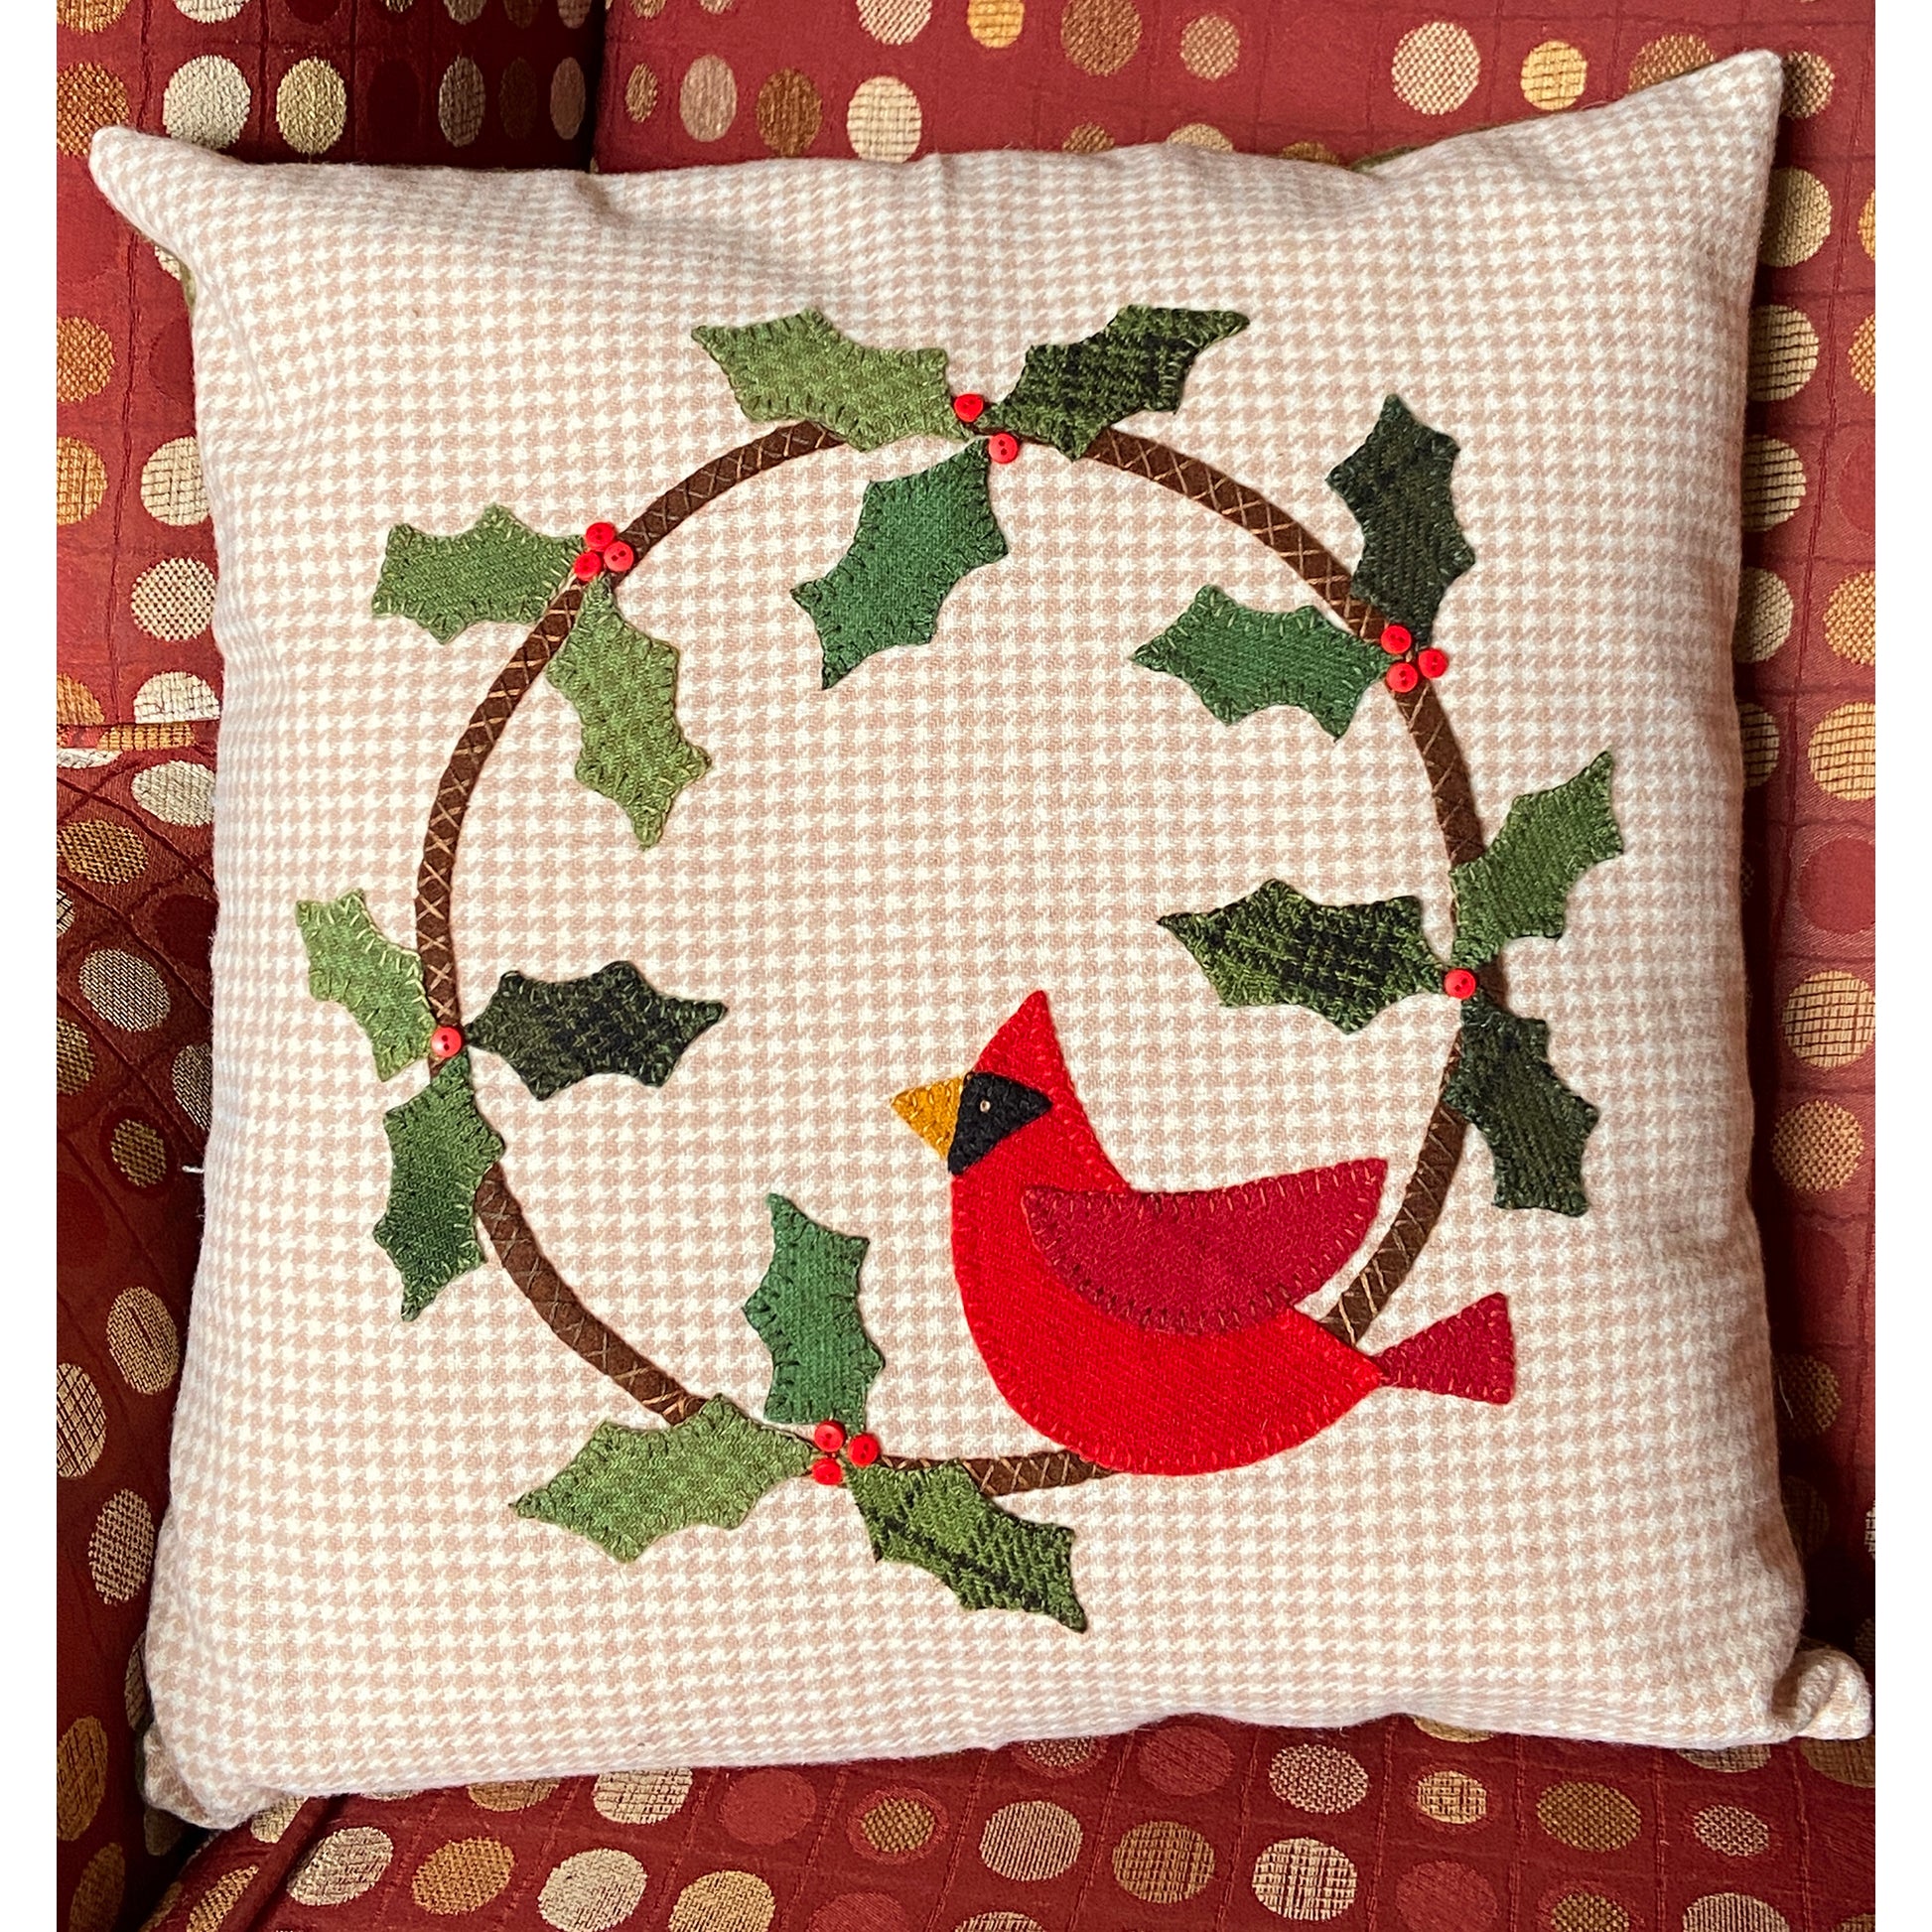 A festive red cardinal pillow adorned with holly leaves, perfect for adding holiday cheer to any space.